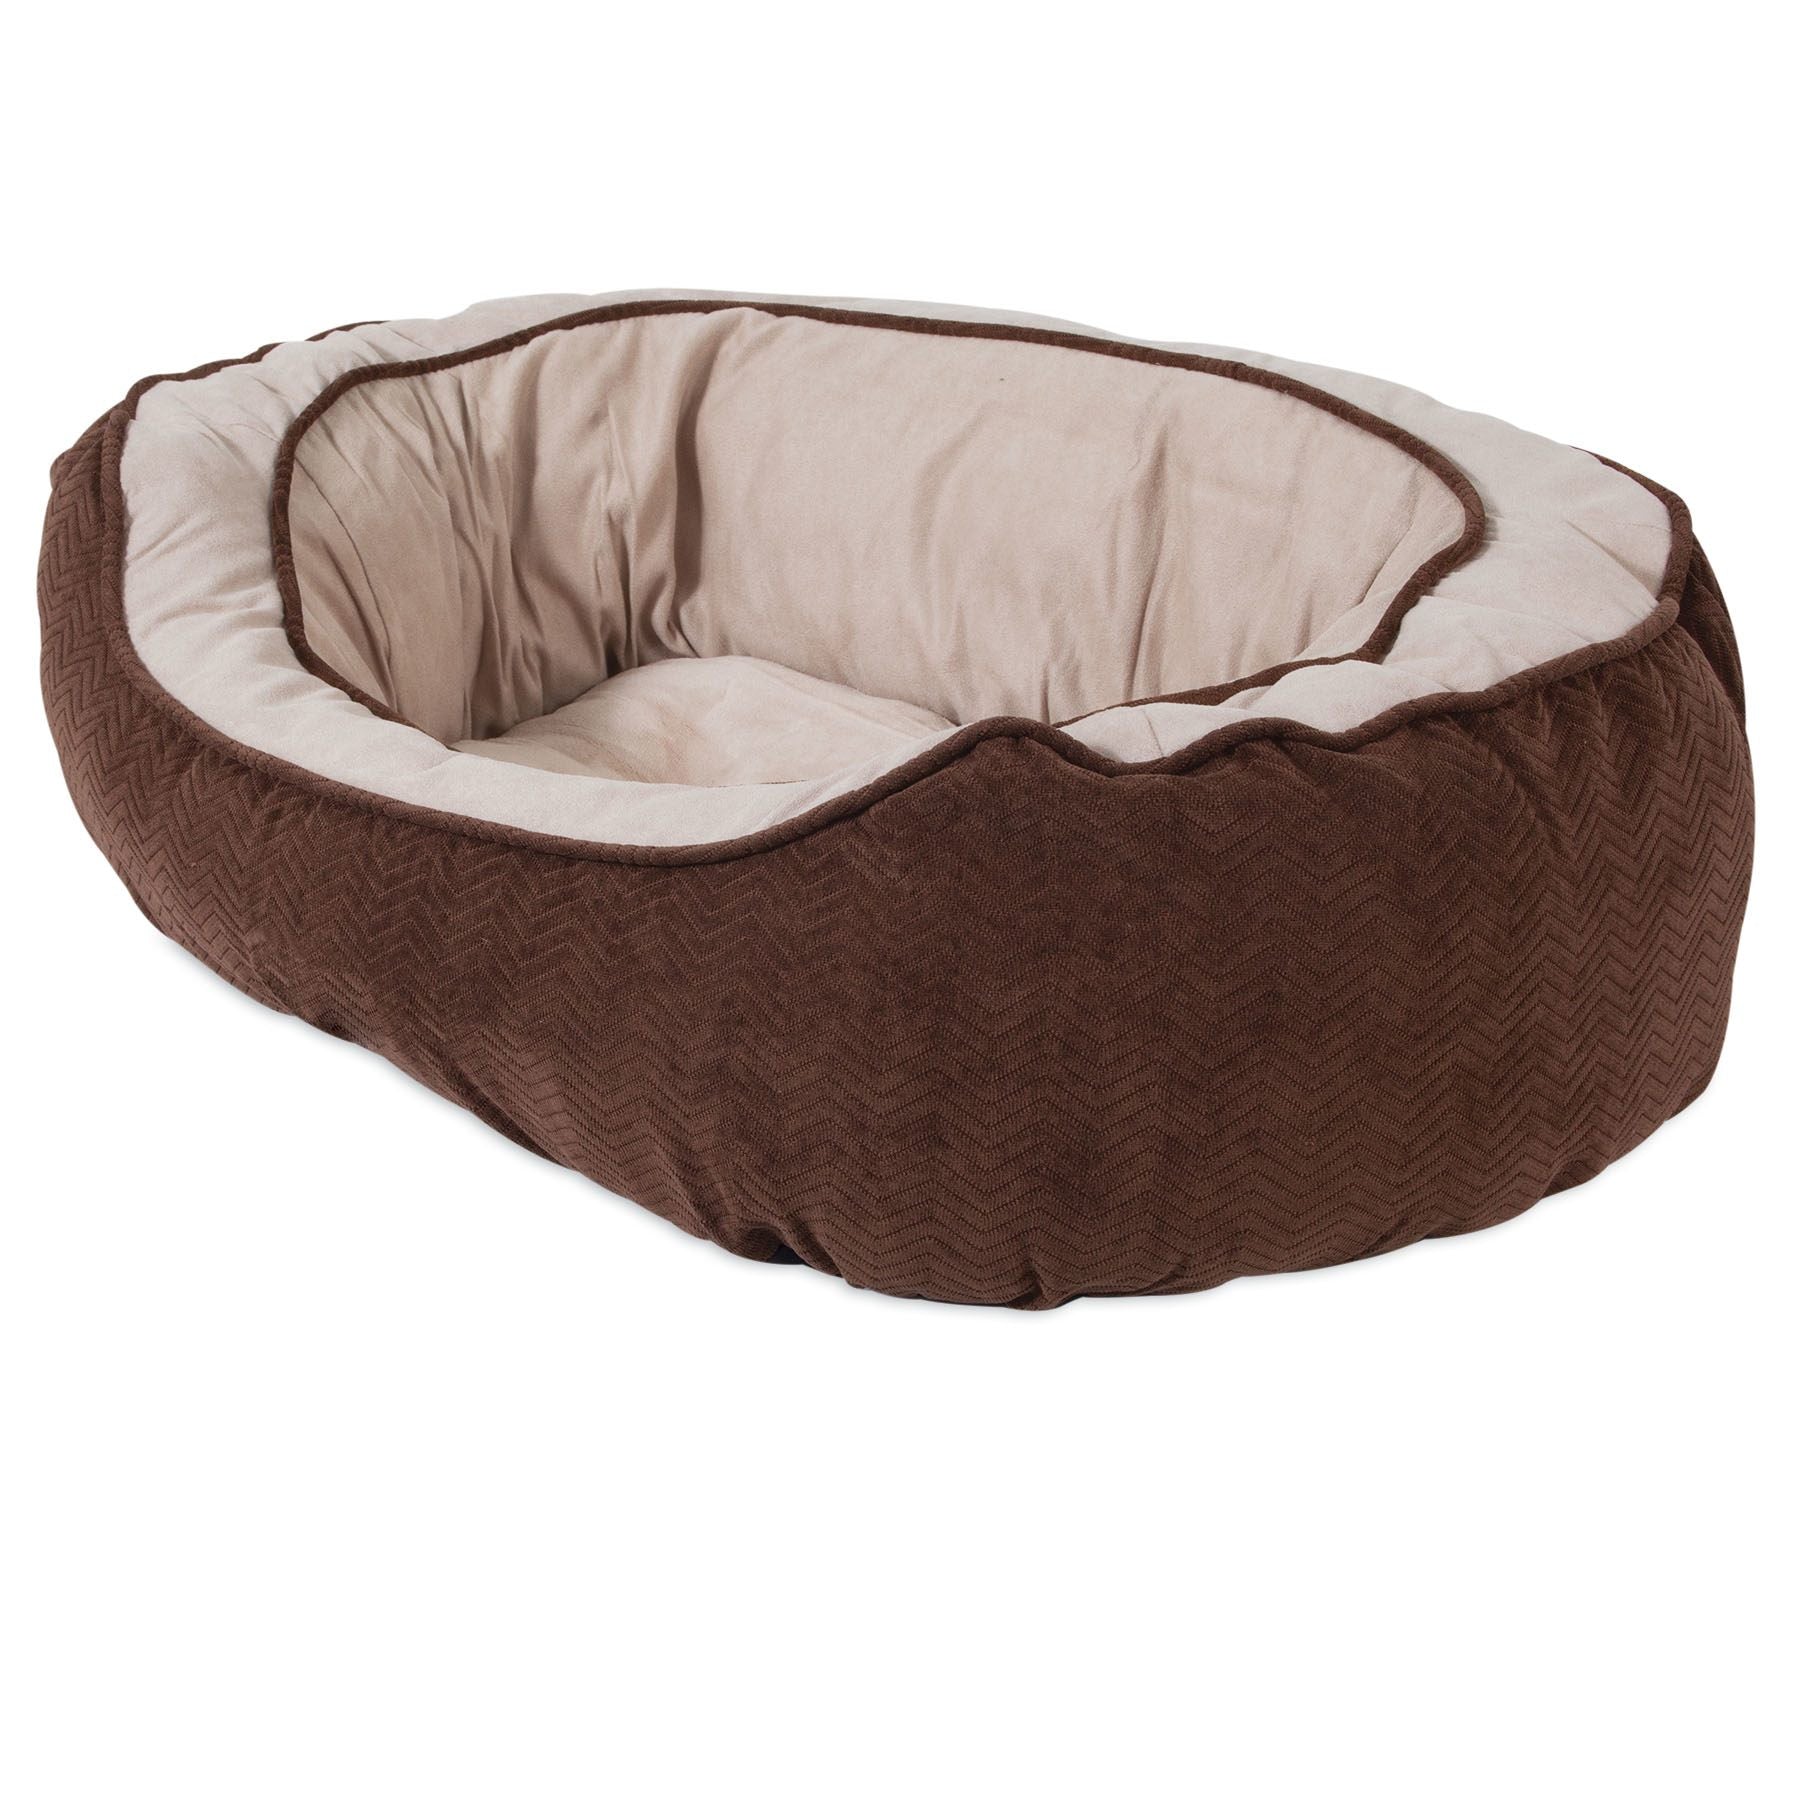 SnooZZy Chevron Gusset Daydreamer Bed - Chocolate